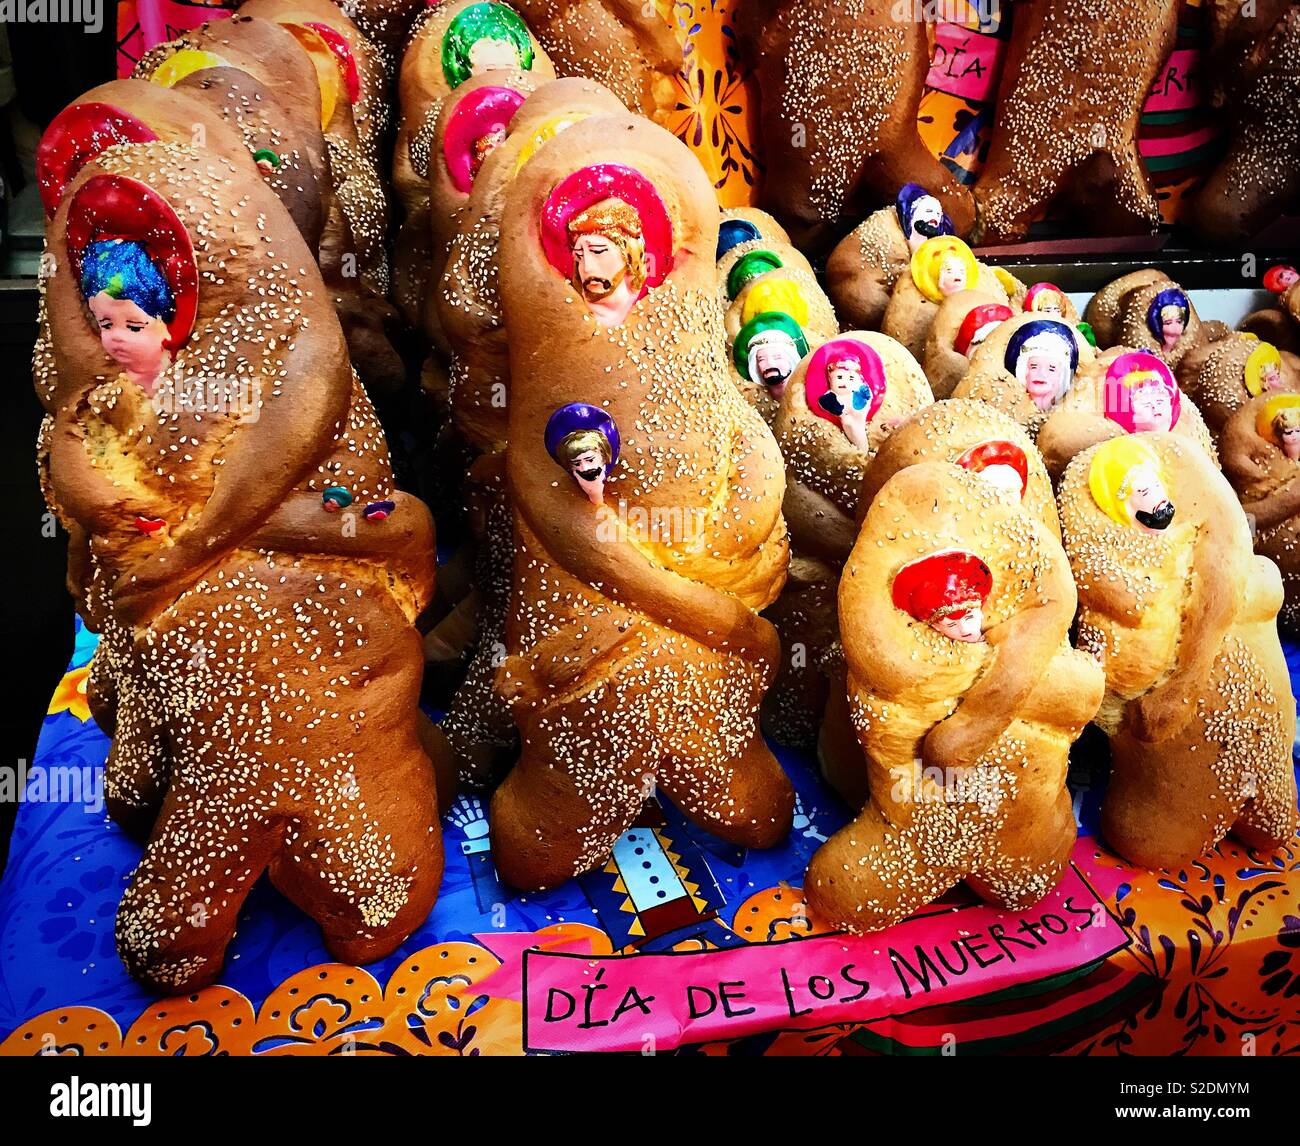 ‘Bread of the dead’, ‘pan de muerto’ in Spanish, decorated with faces of Jesus and saints, for sale in a market during Day of the Dead celebration in Oaxaca, Mexico Stock Photo